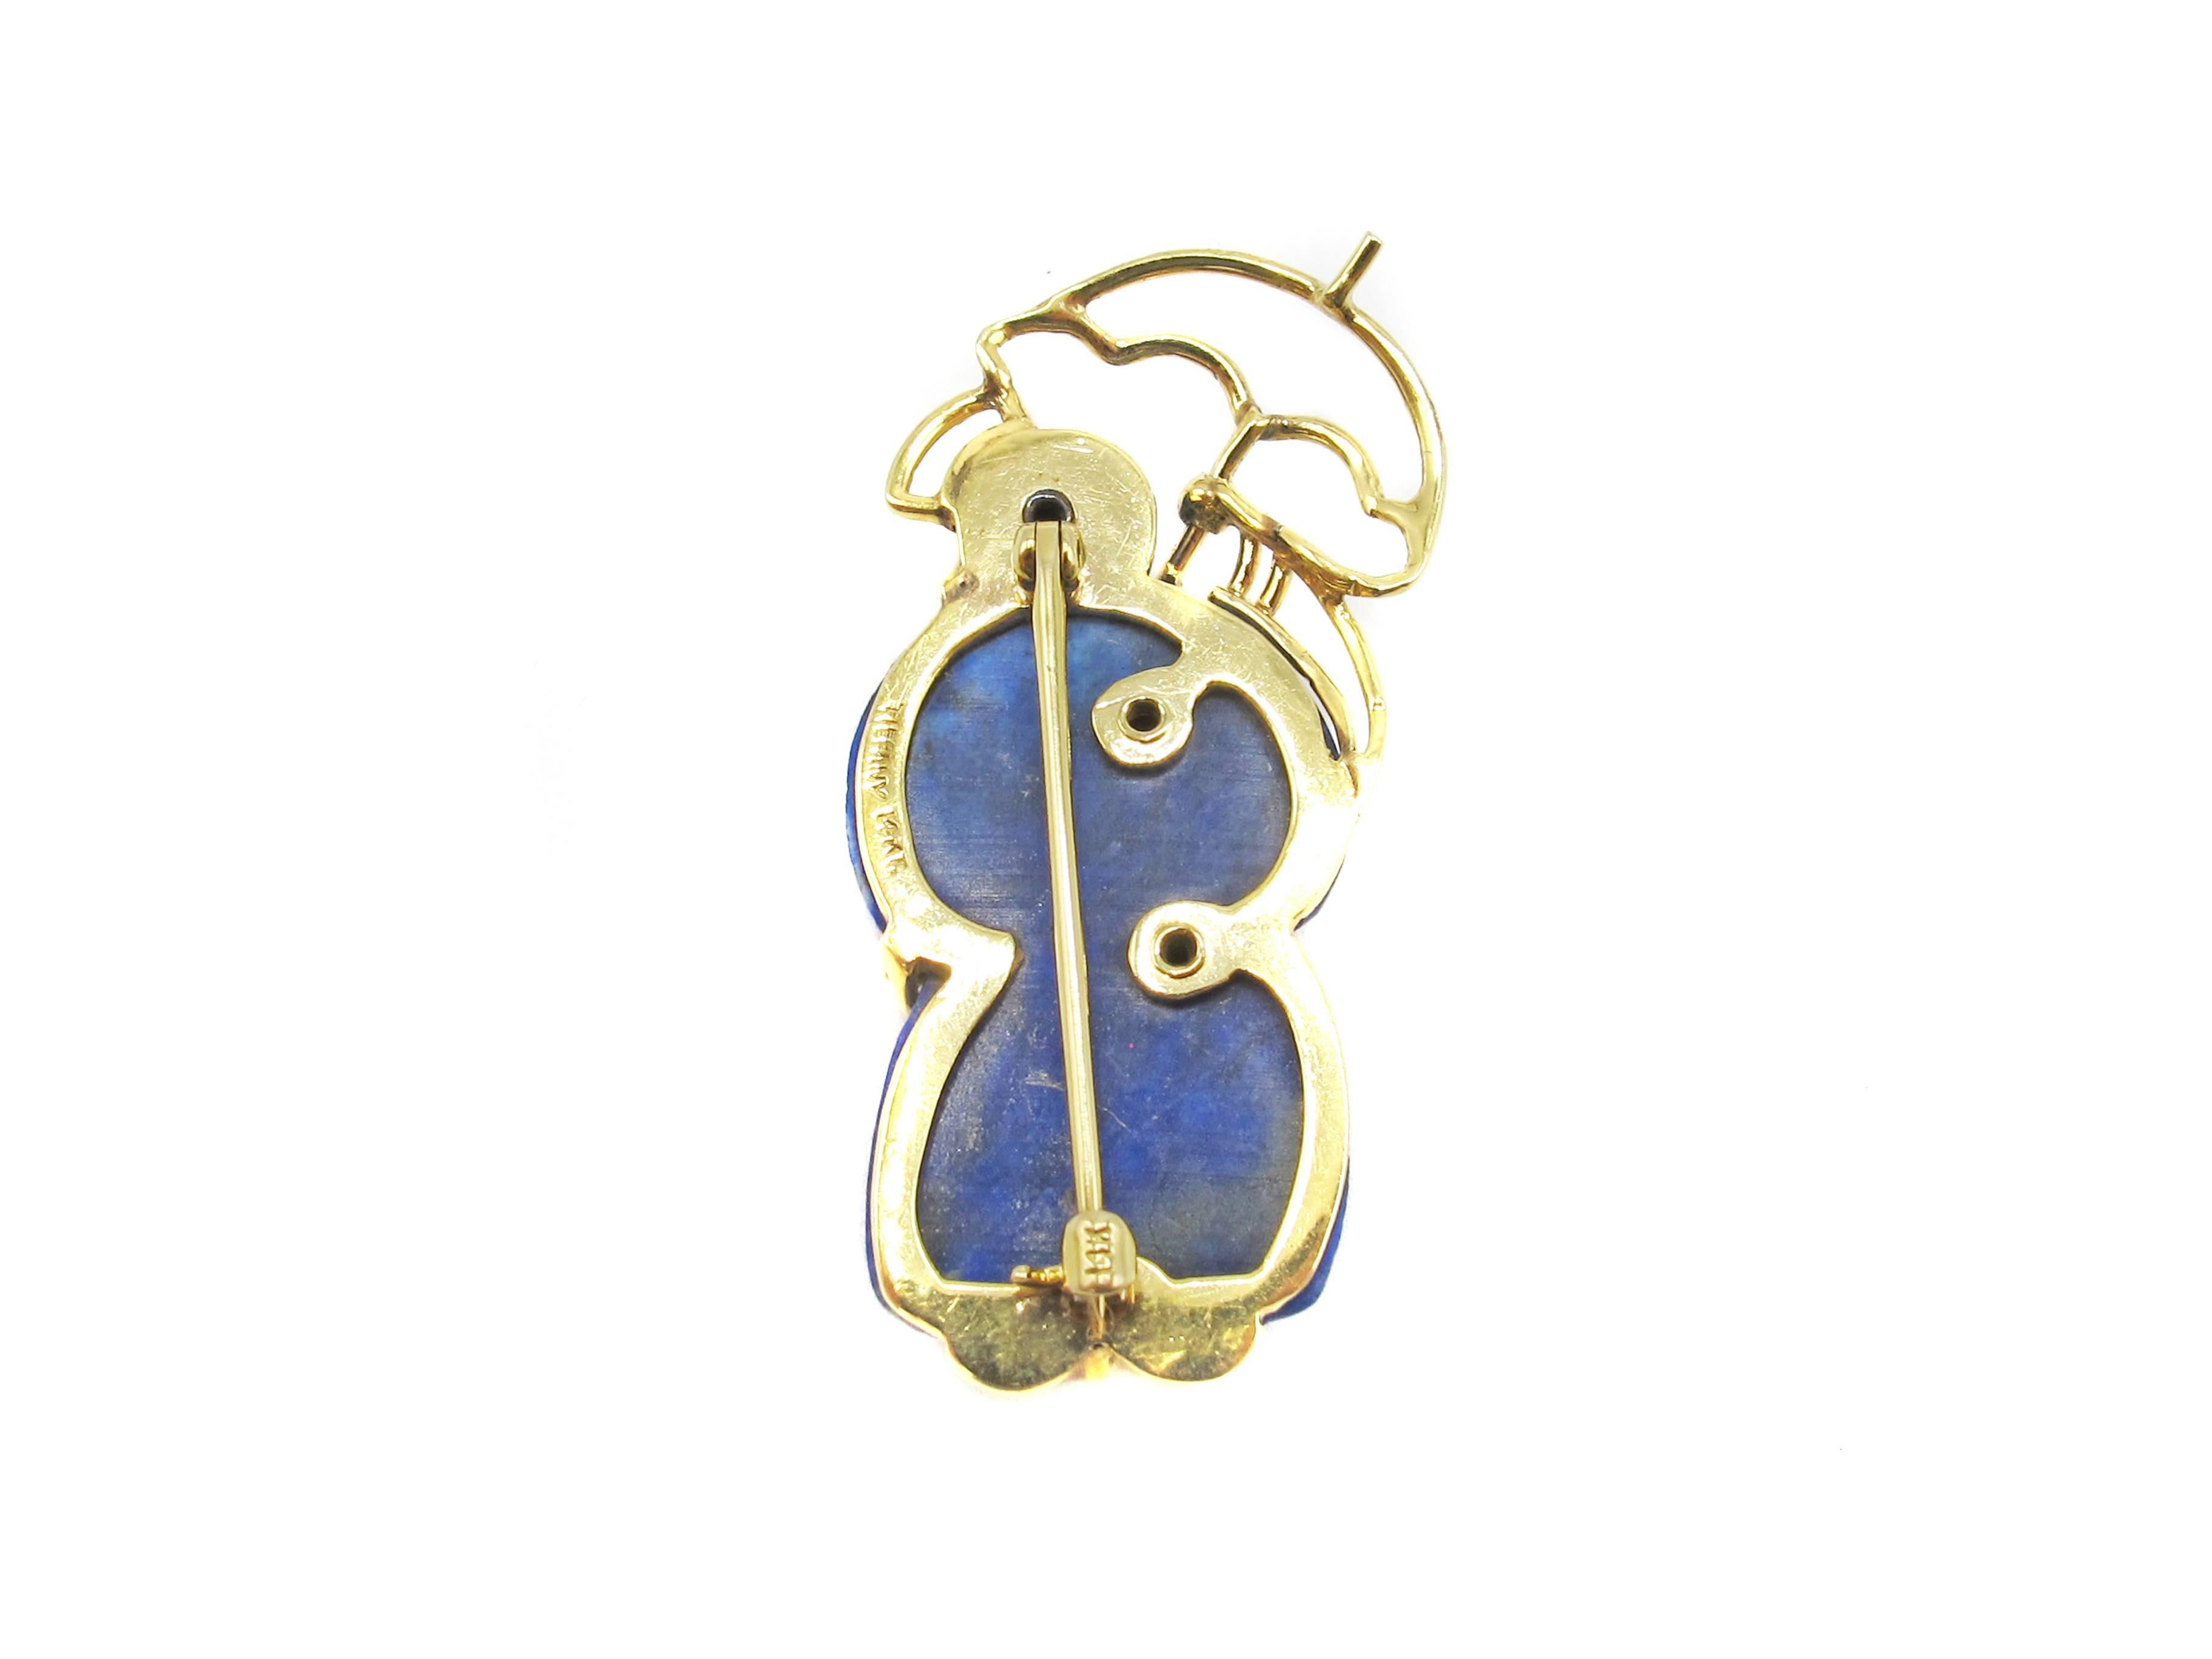 This original Lapis Lazuli and yellow gold sculptural pin, is an artifact of renown house Tiffany & Co. Symbolizing a penguin like statue with an umbrella, this modern jewel bears witness of the designer’s fantasy, inspired by the shape of the